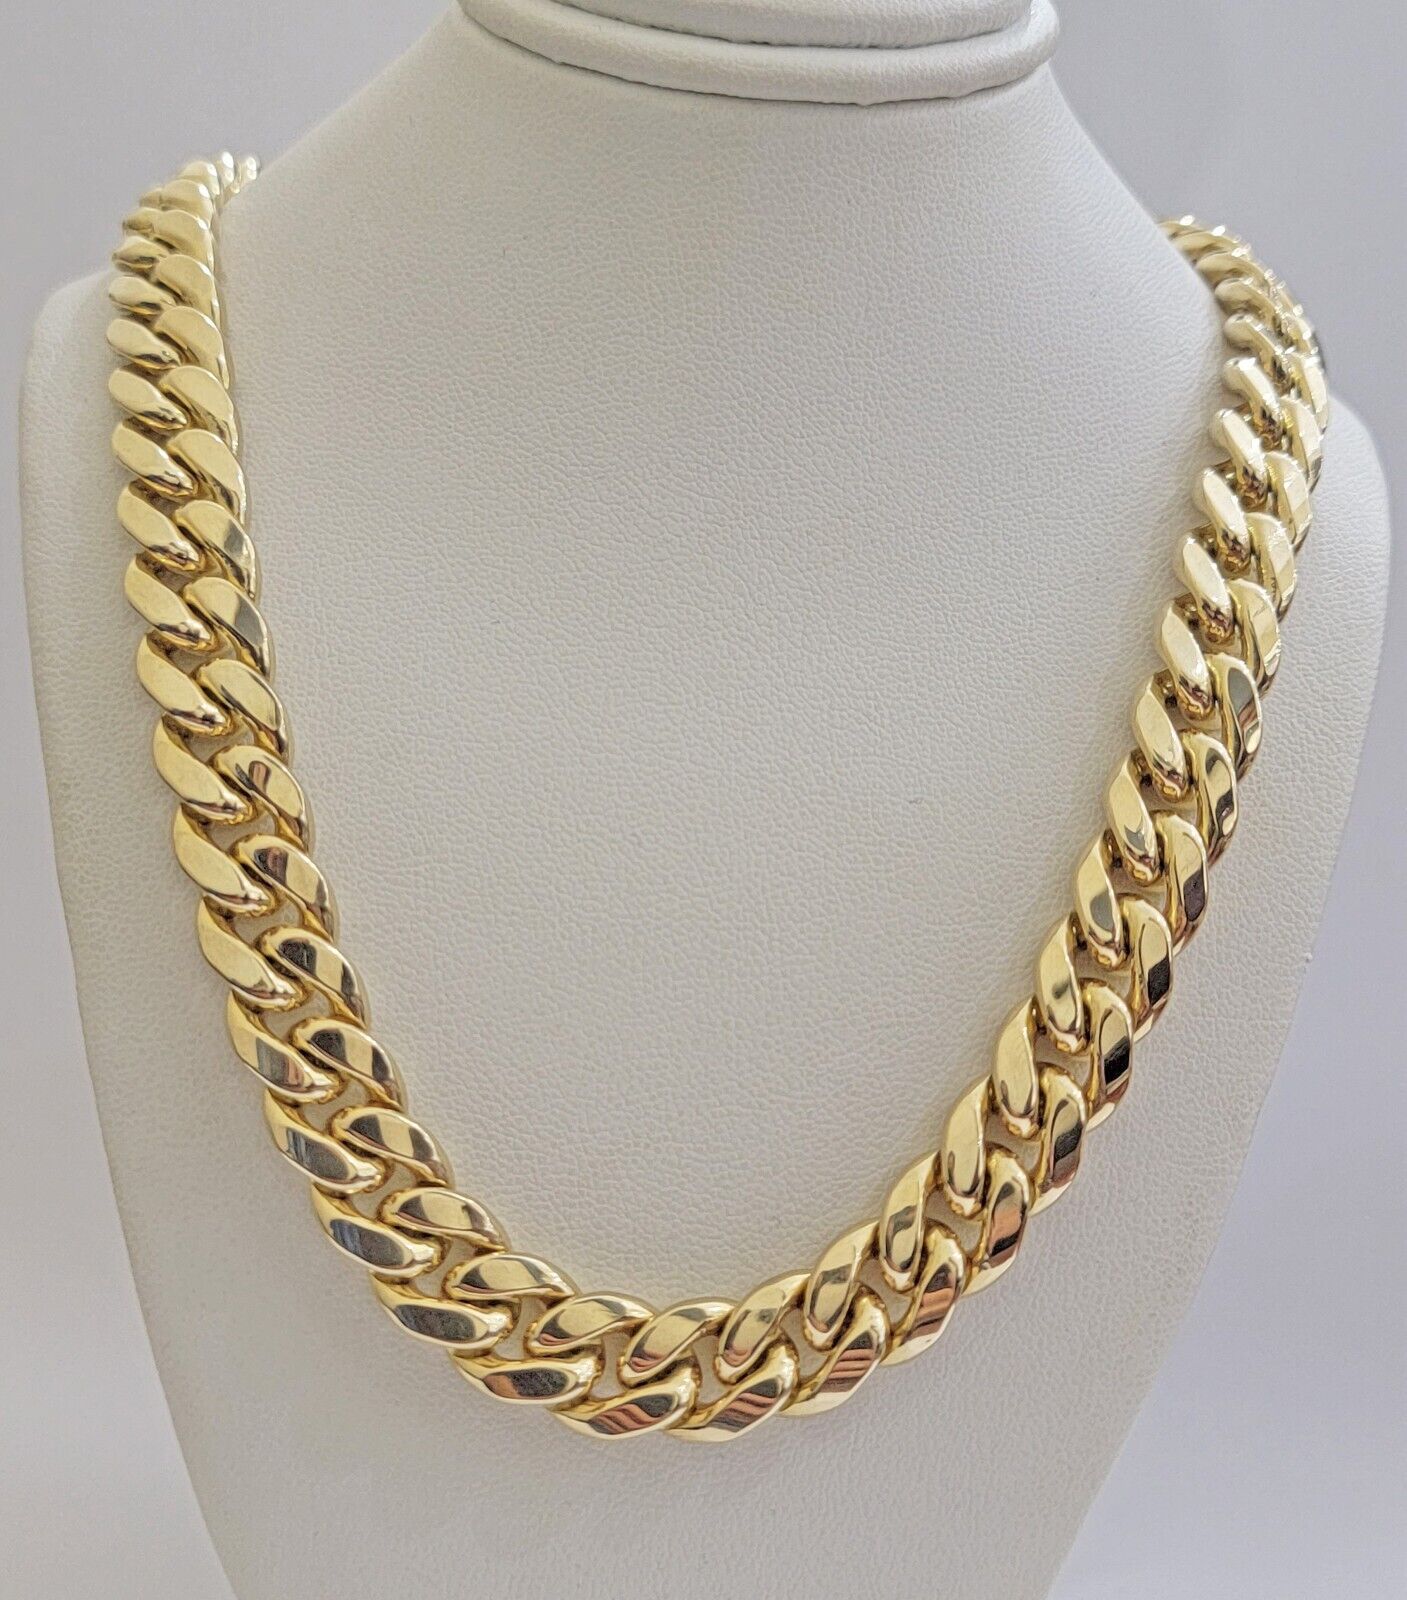 11mm Cuban Solid Link Chain Mens Necklace 10k Yellow Gold 22" Thick Heavy, SALE